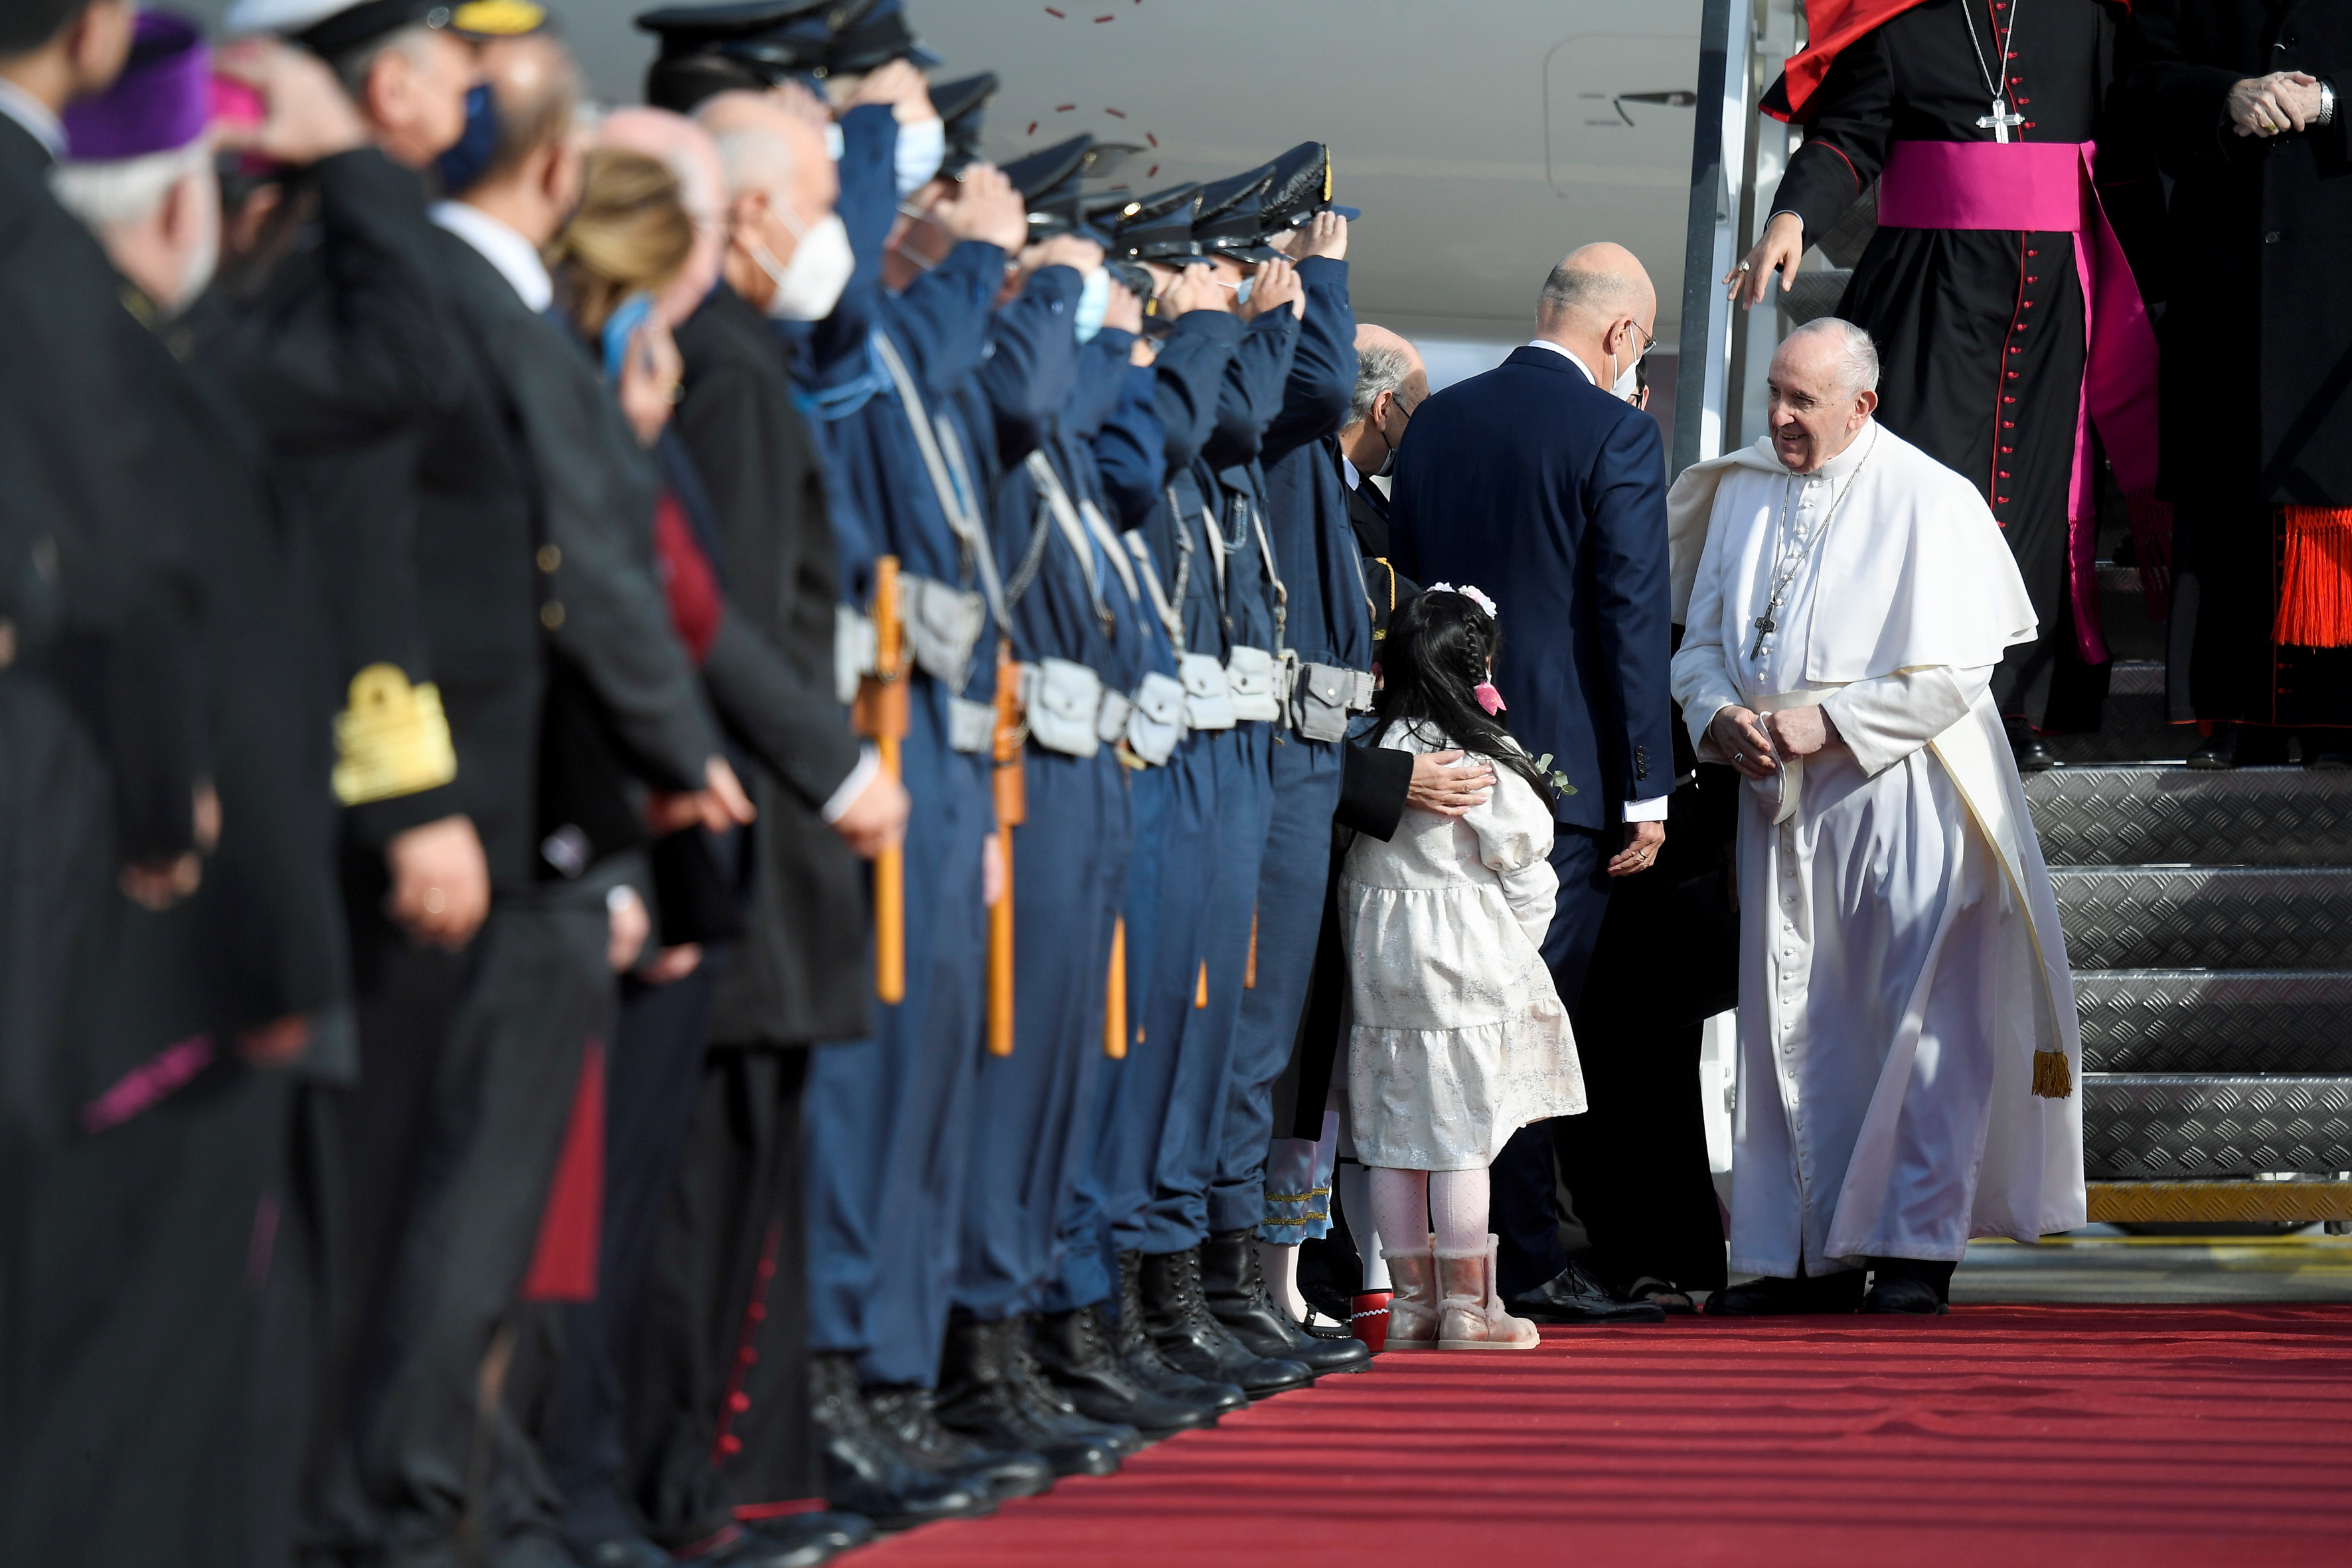 Pope arrives in Greece blasting rise of nationalism across Europe